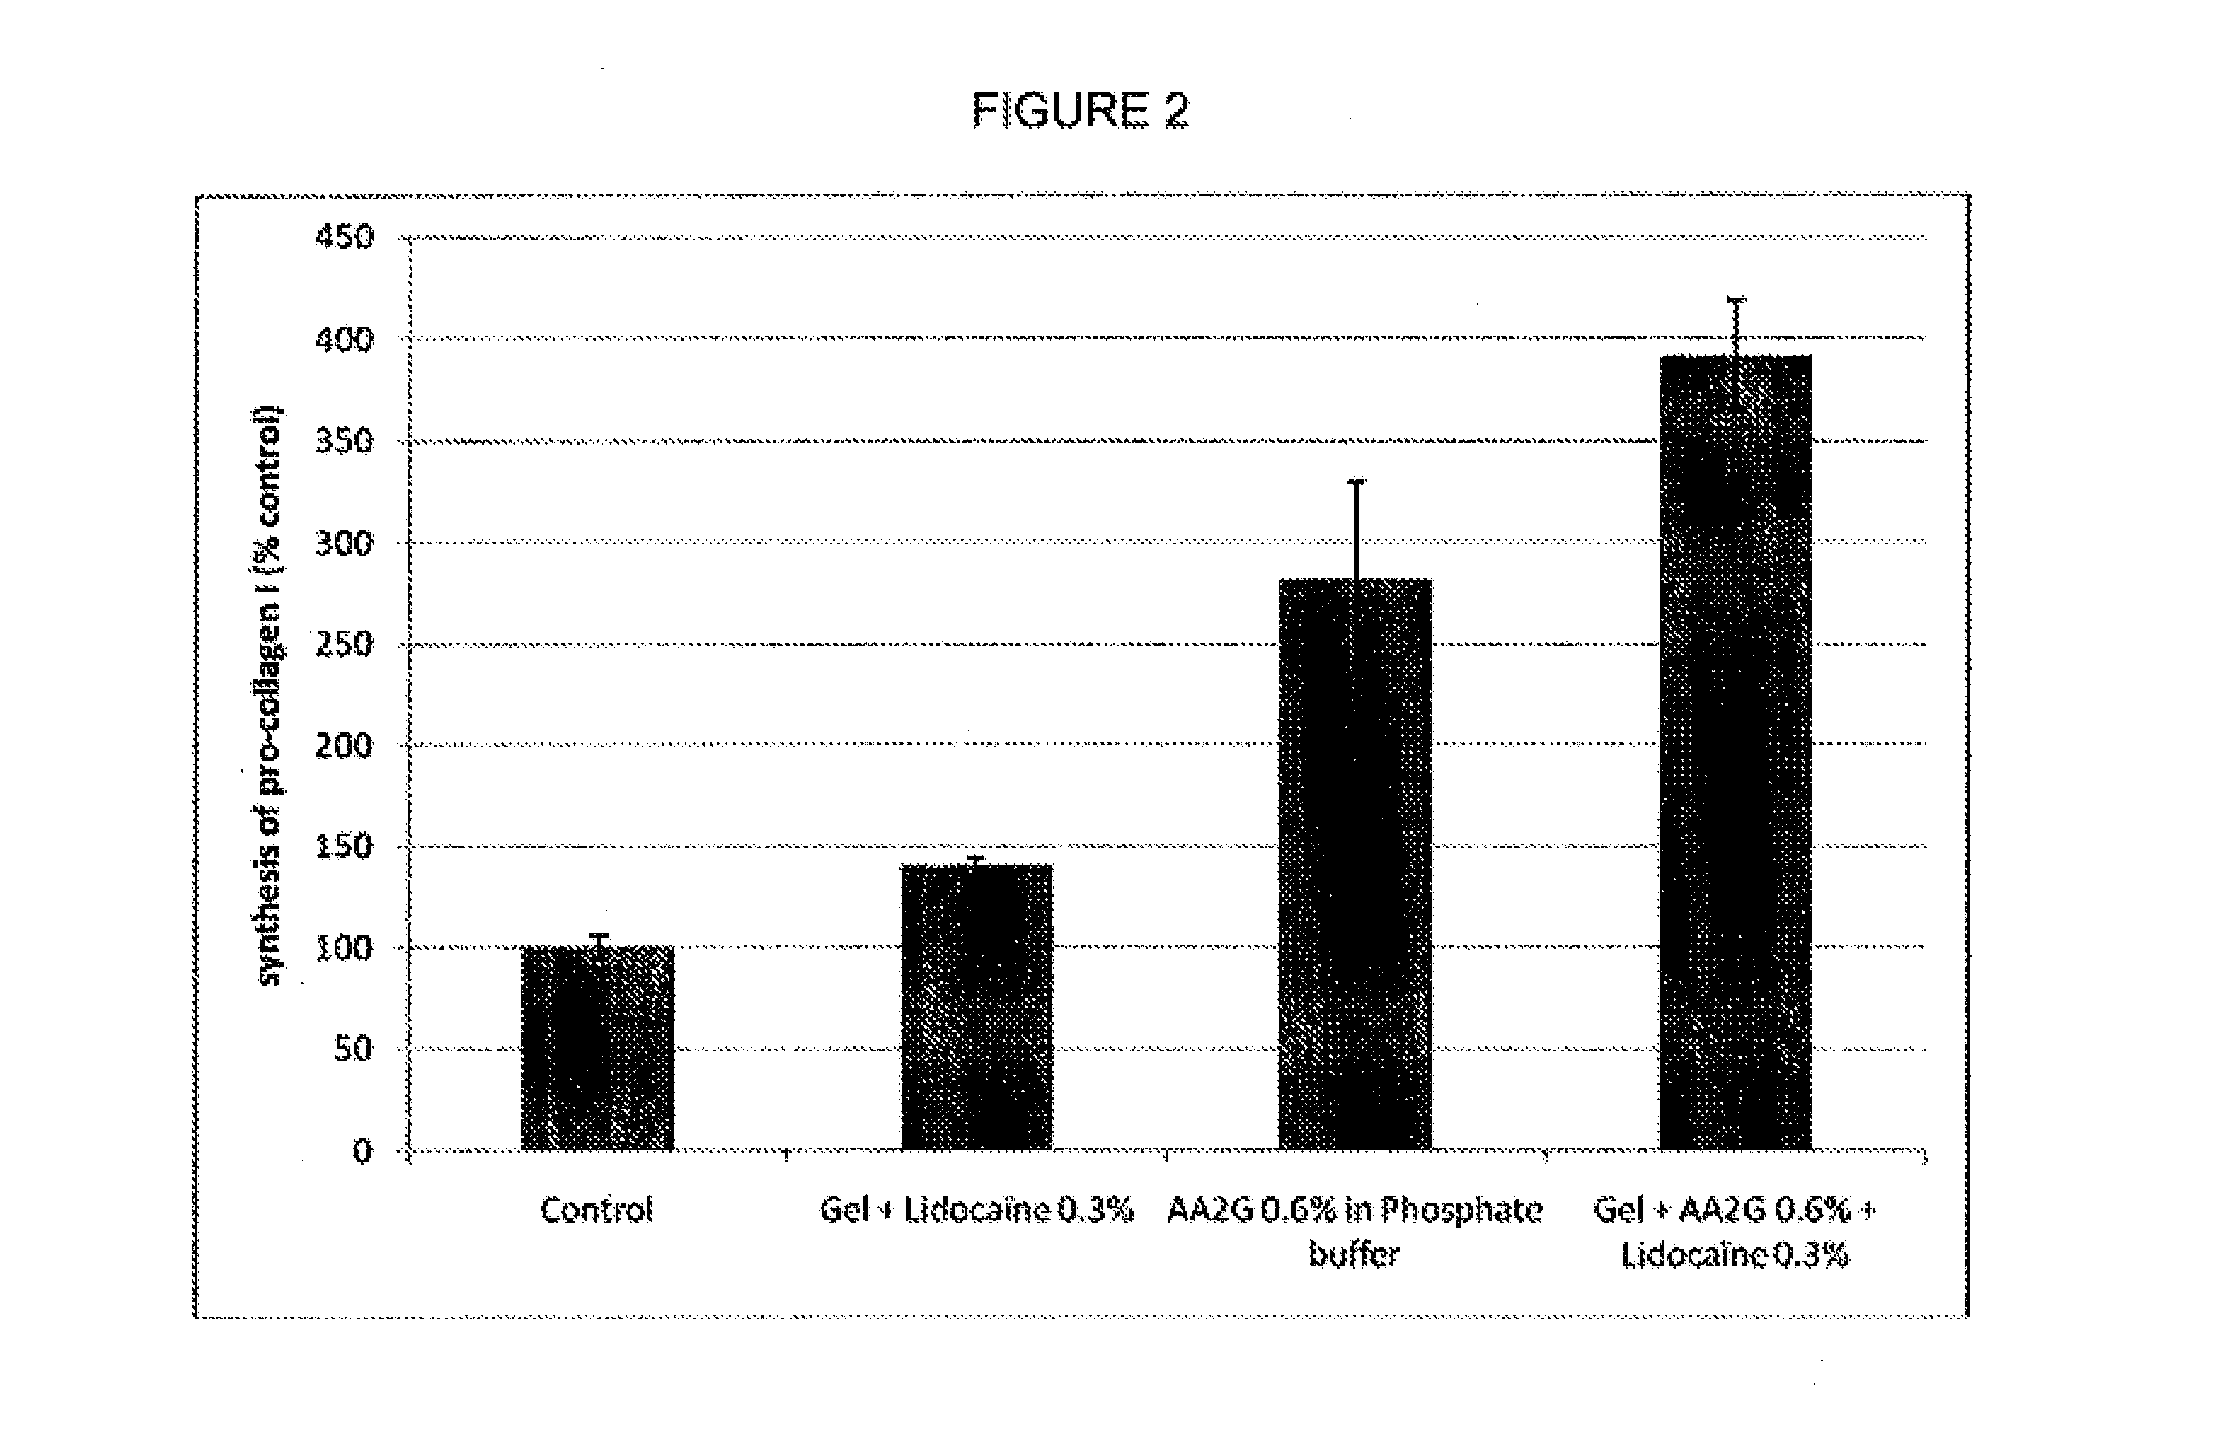 Hydrogel compositions comprising vasoconstricting and Anti-hemorrhagic agents for dermatological use